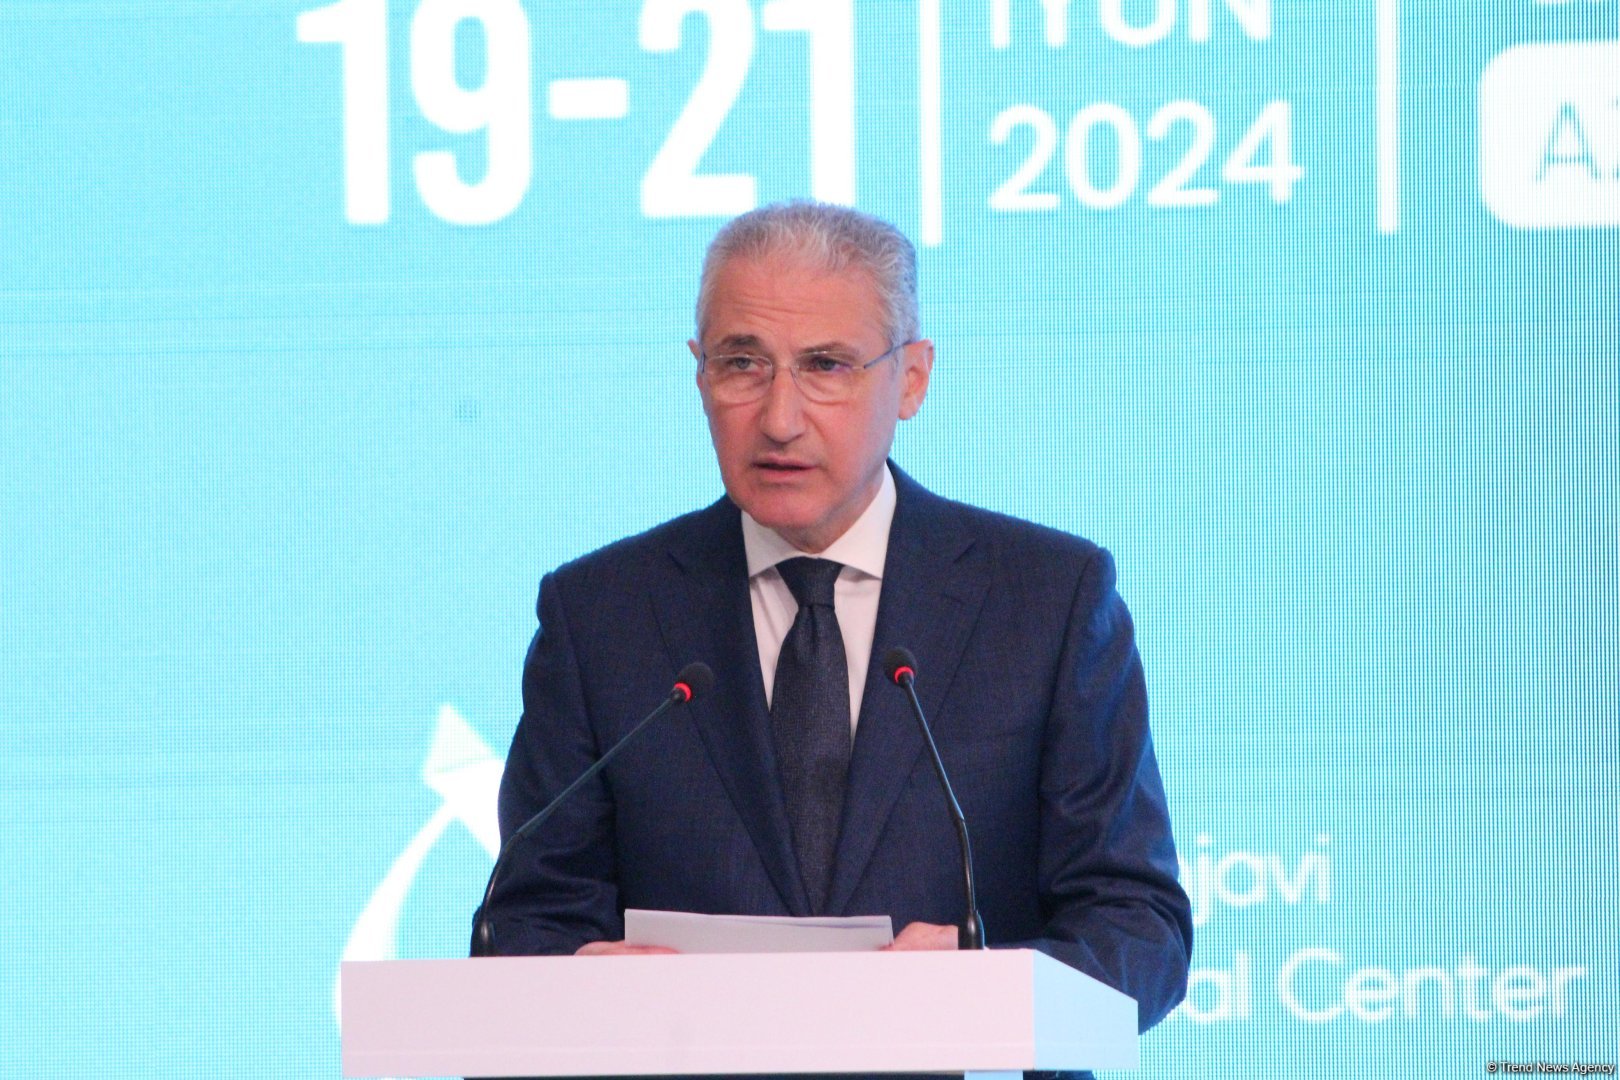 It's important to find common solutions on climate action at COP29 - Azerbaijani minister